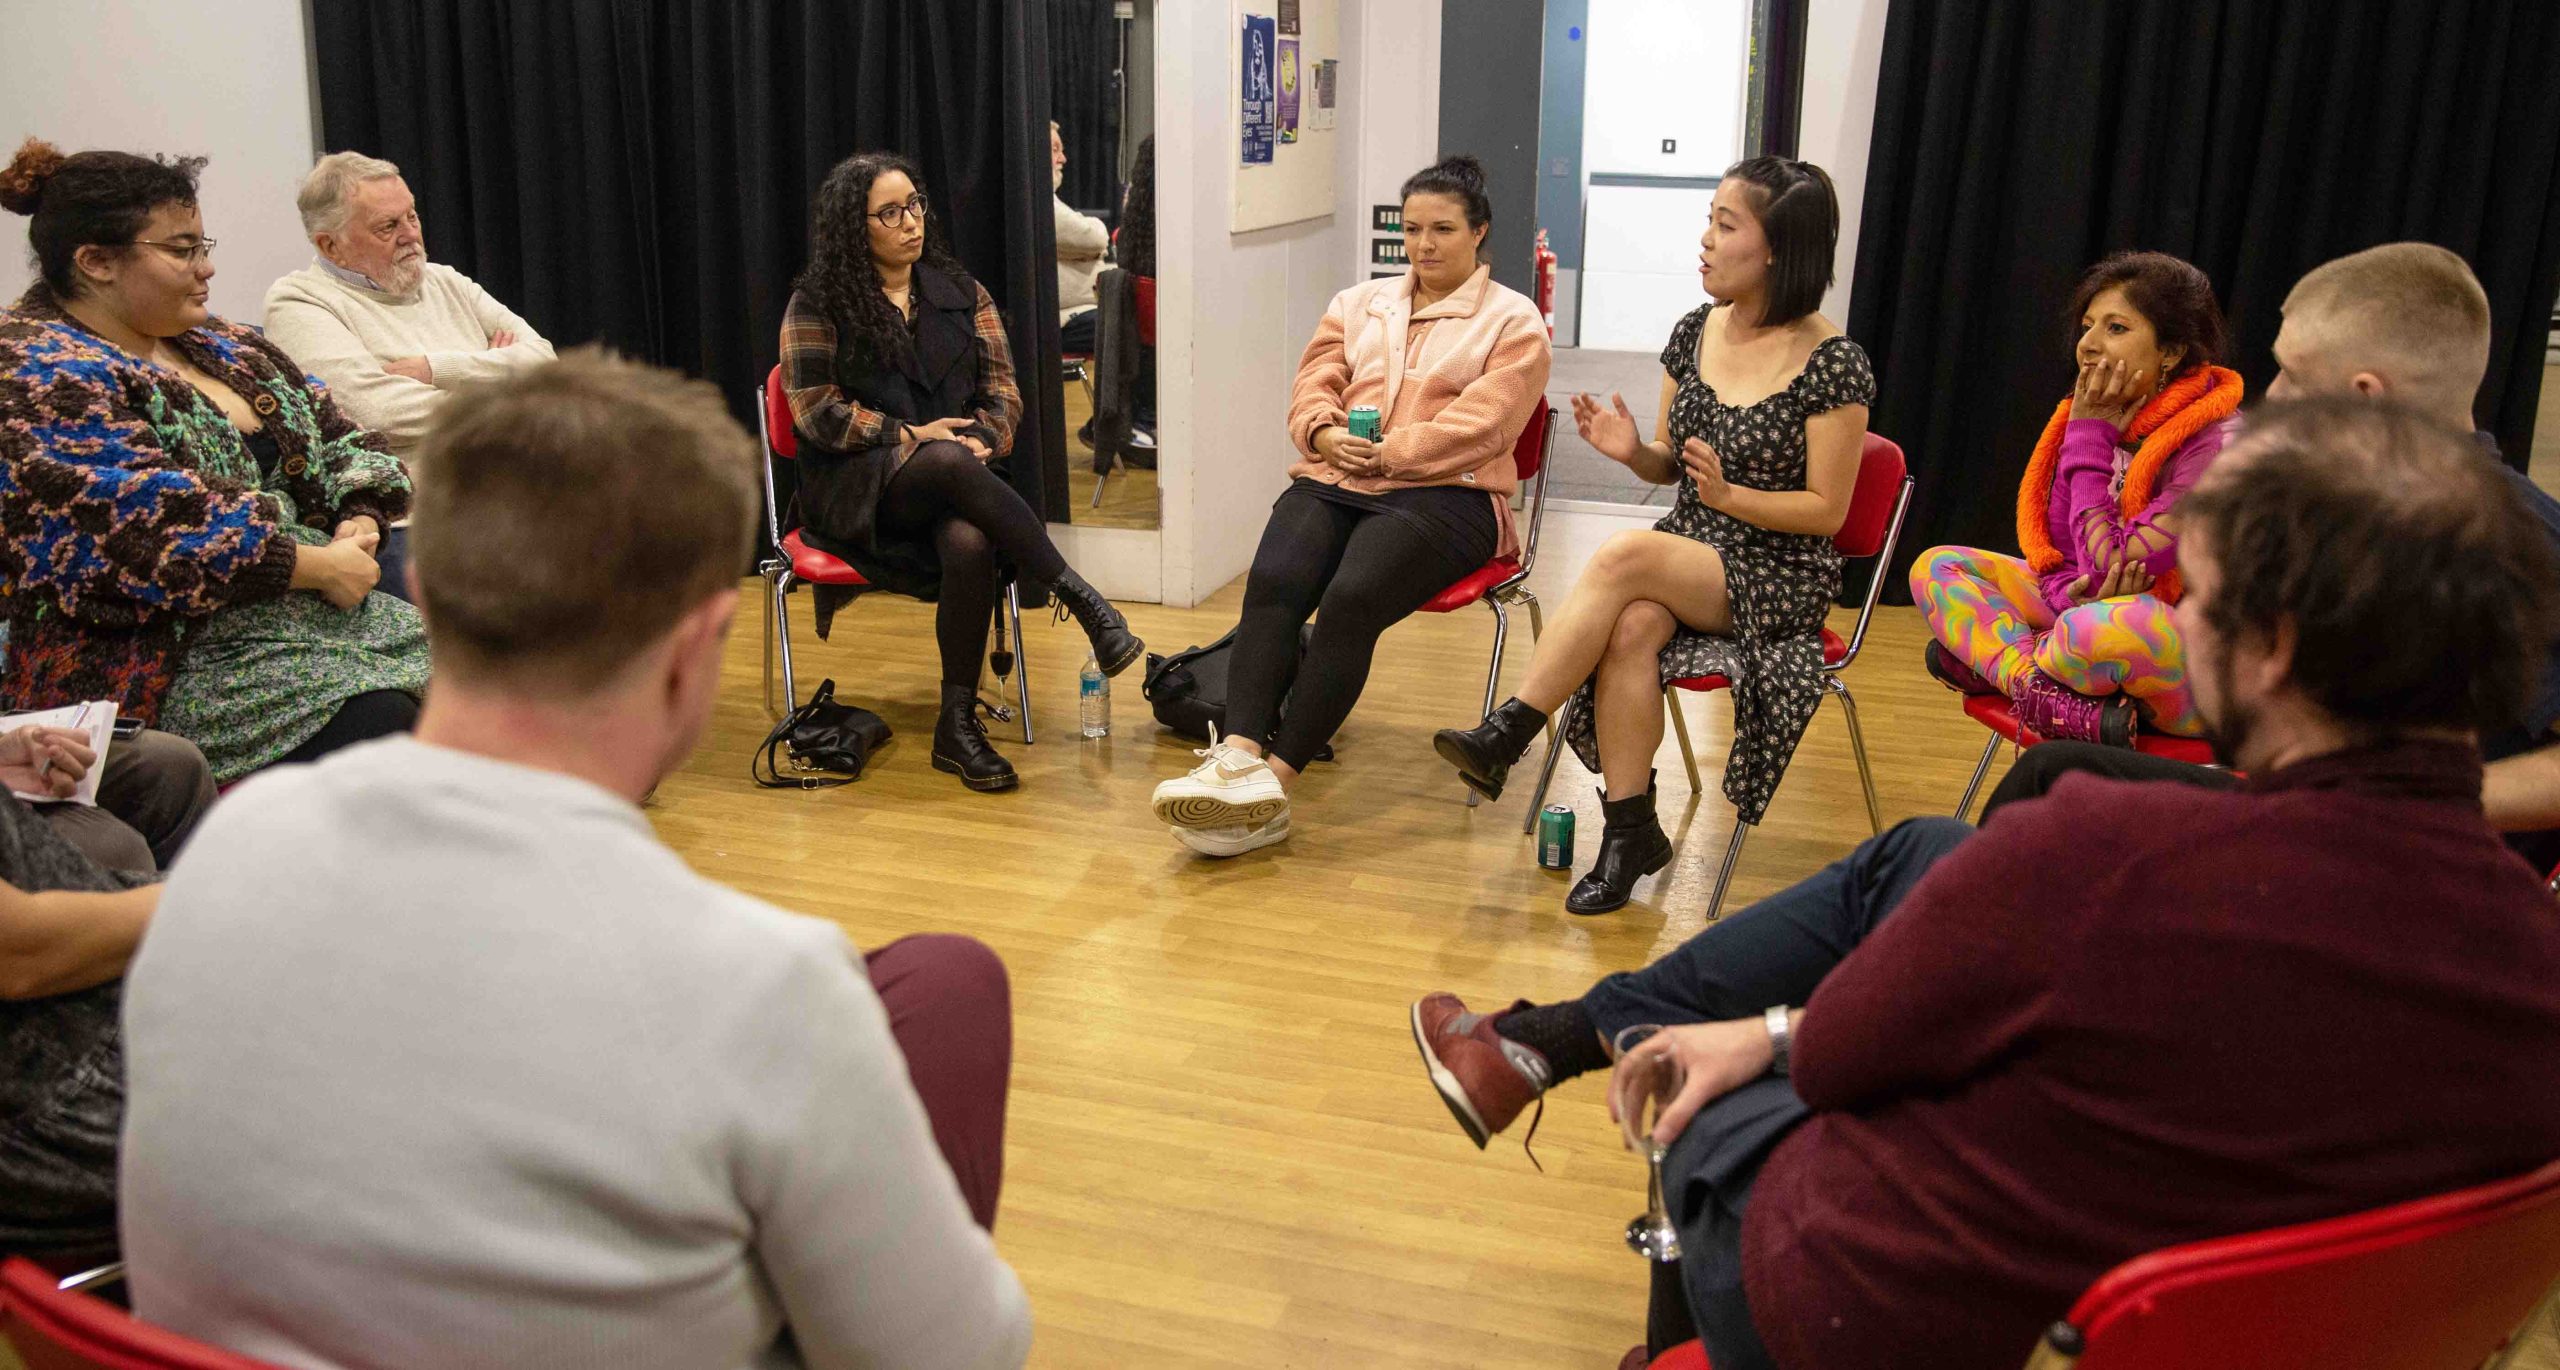 A group of people sat in chairs in a circle discussing different topics in a dance studio.